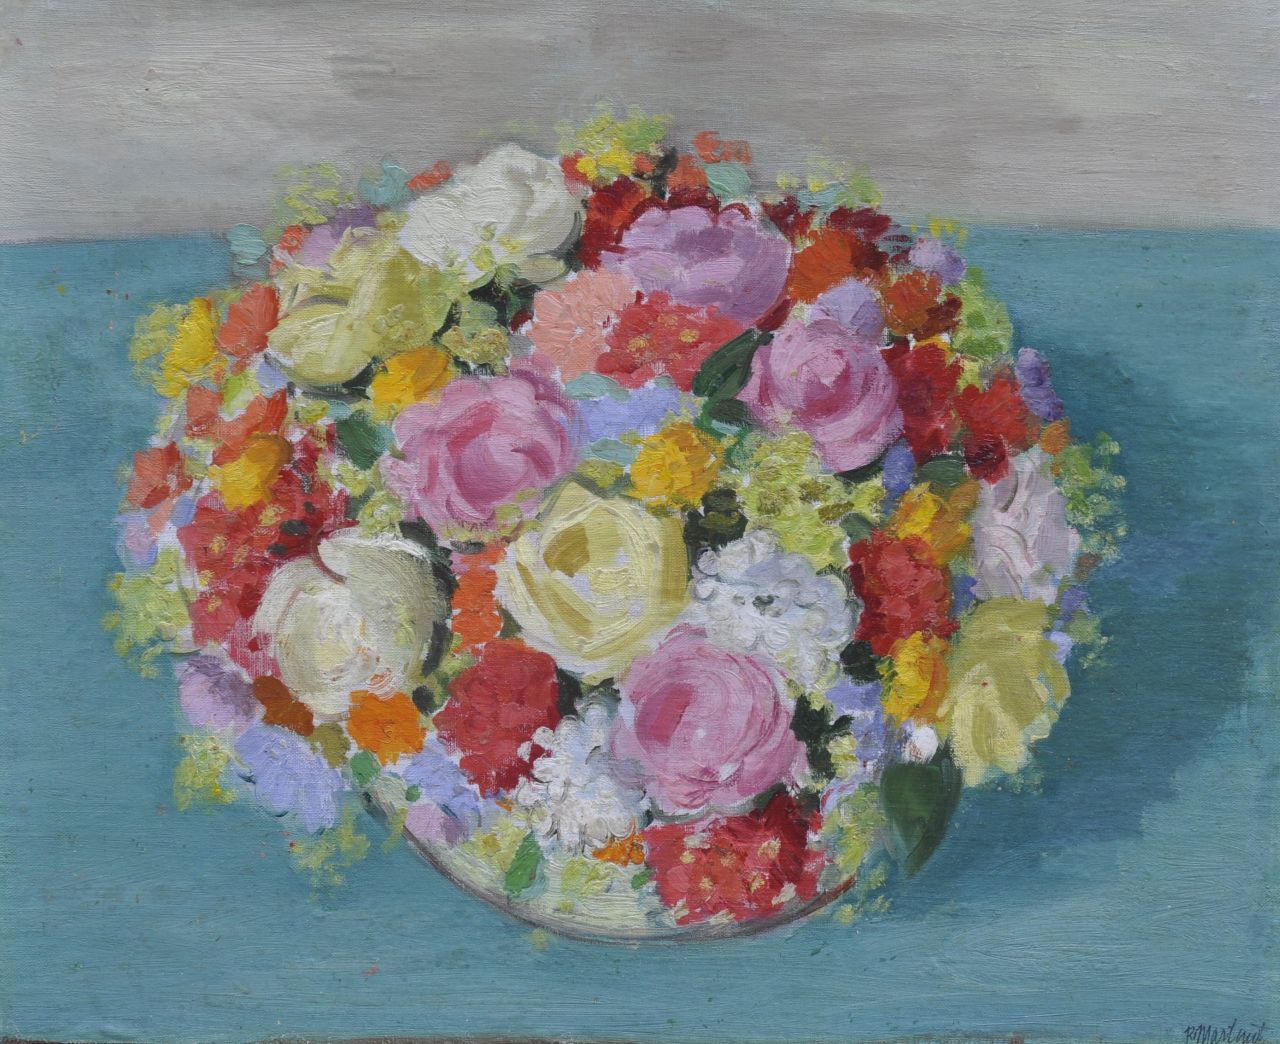 Martinez R.  | Raoul Martinez, Flowers, oil on canvas laid down on board 48.9 x 60.5 cm, signed l.r.